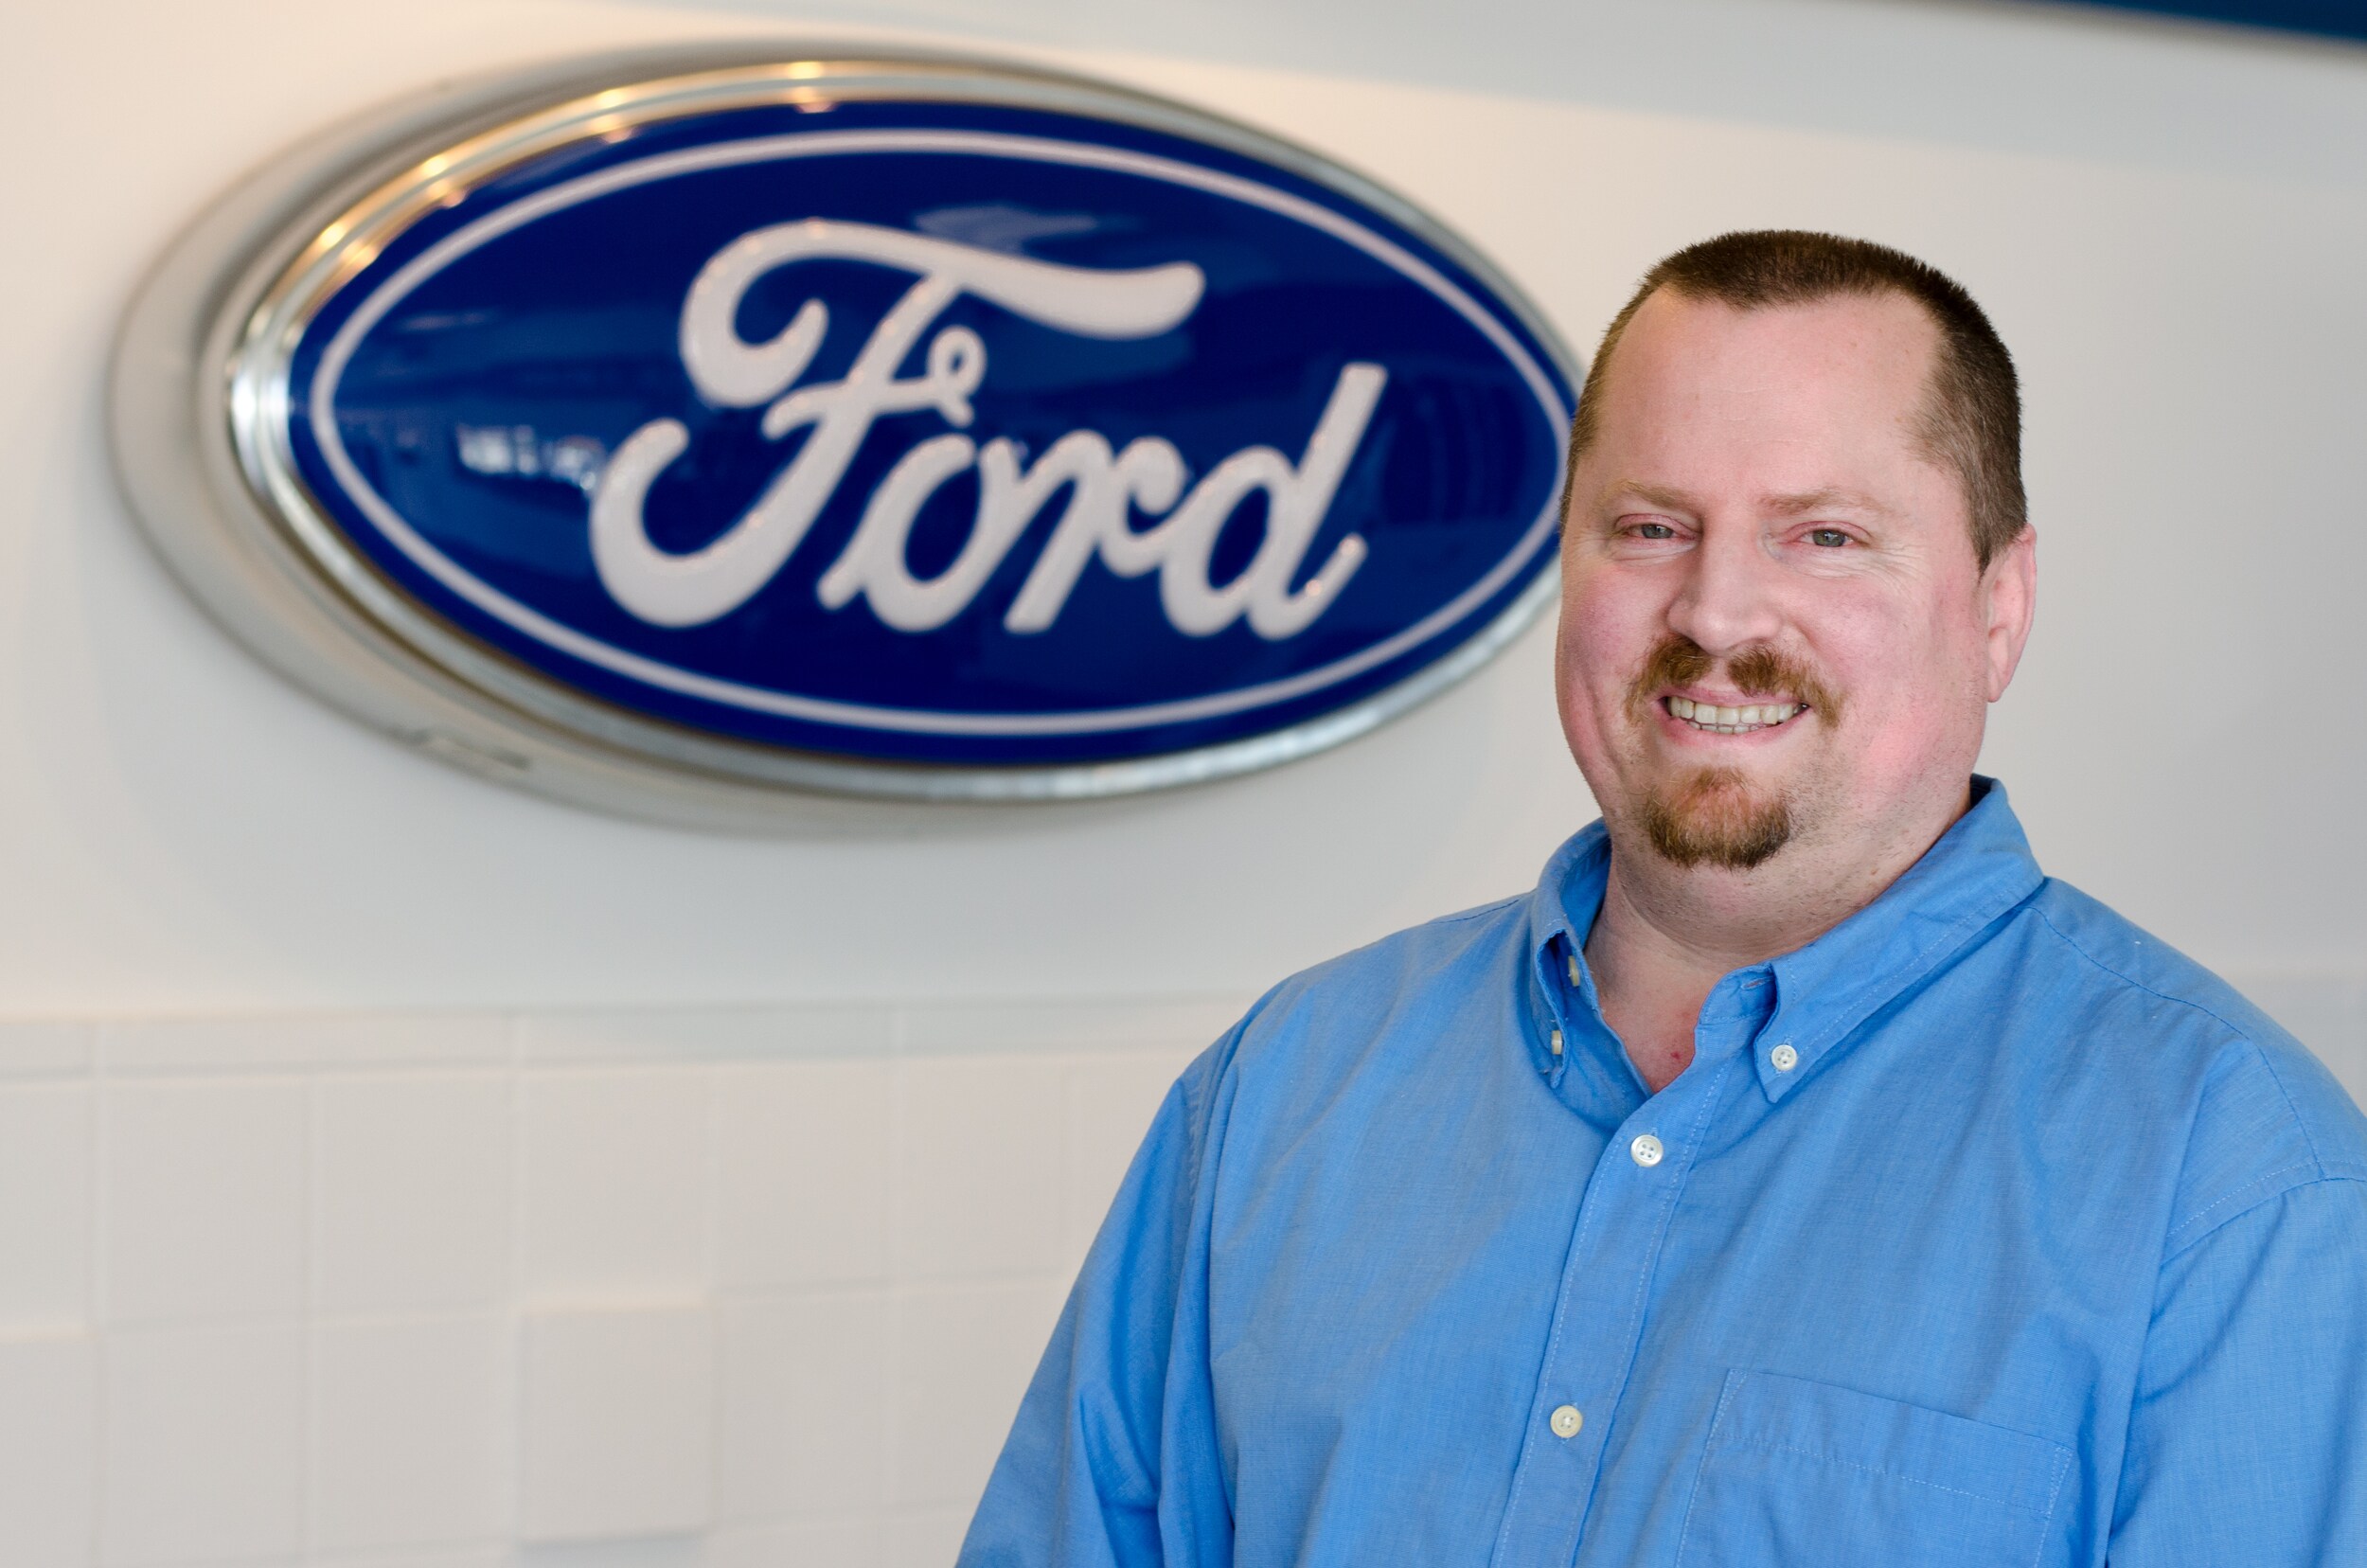 Ford owner advantage service #3